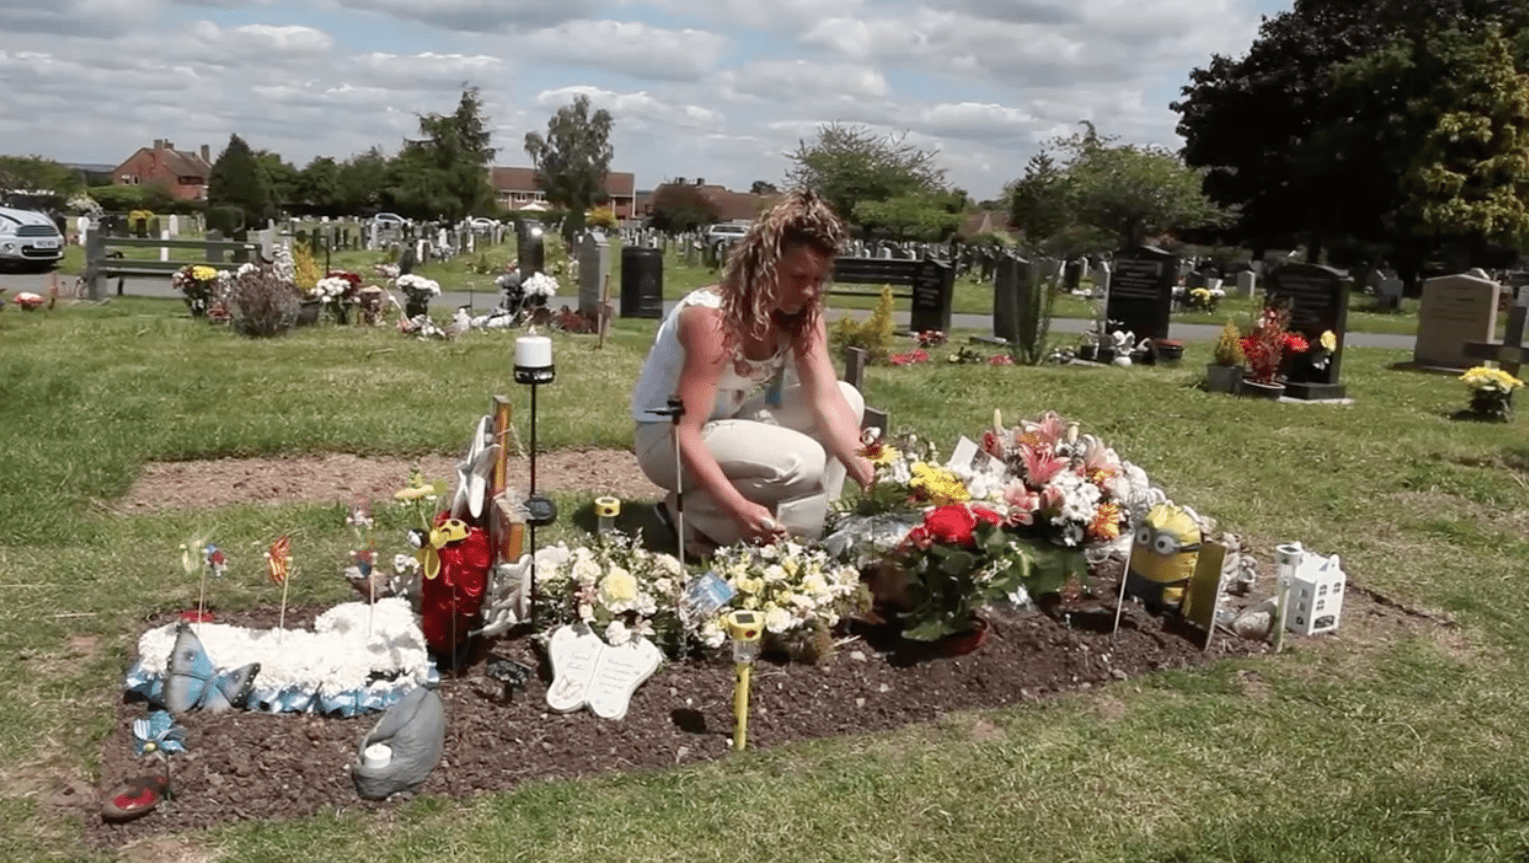 Jo Corbett-Weeks visiting her son's grave. | Source: dailymotion.com/SWNS